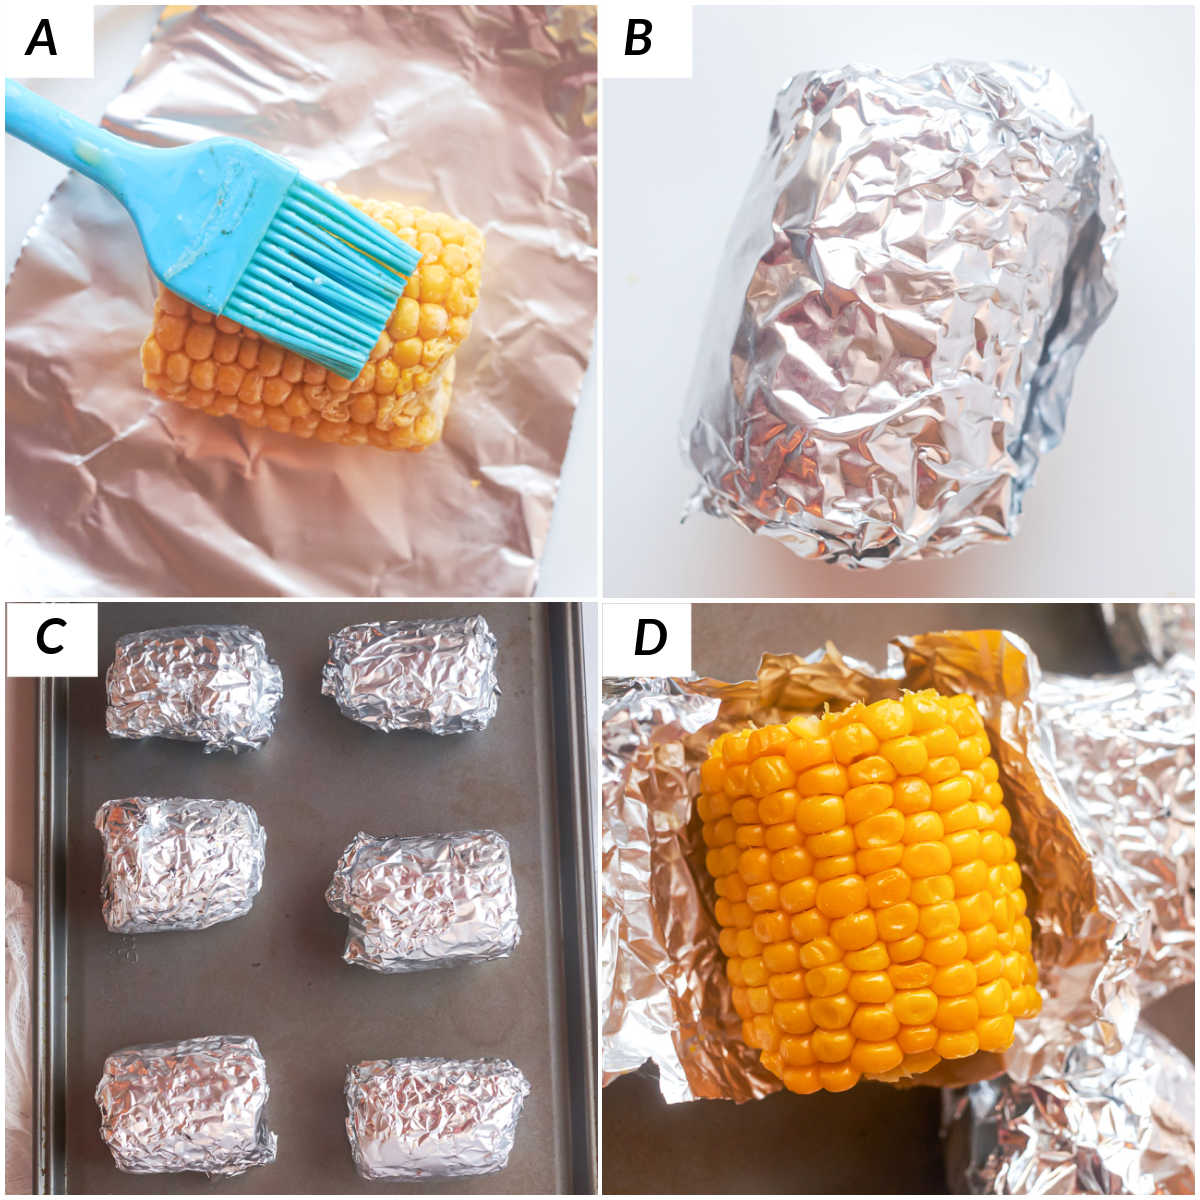 image collage showing the steps for making corn on the cob in the oven